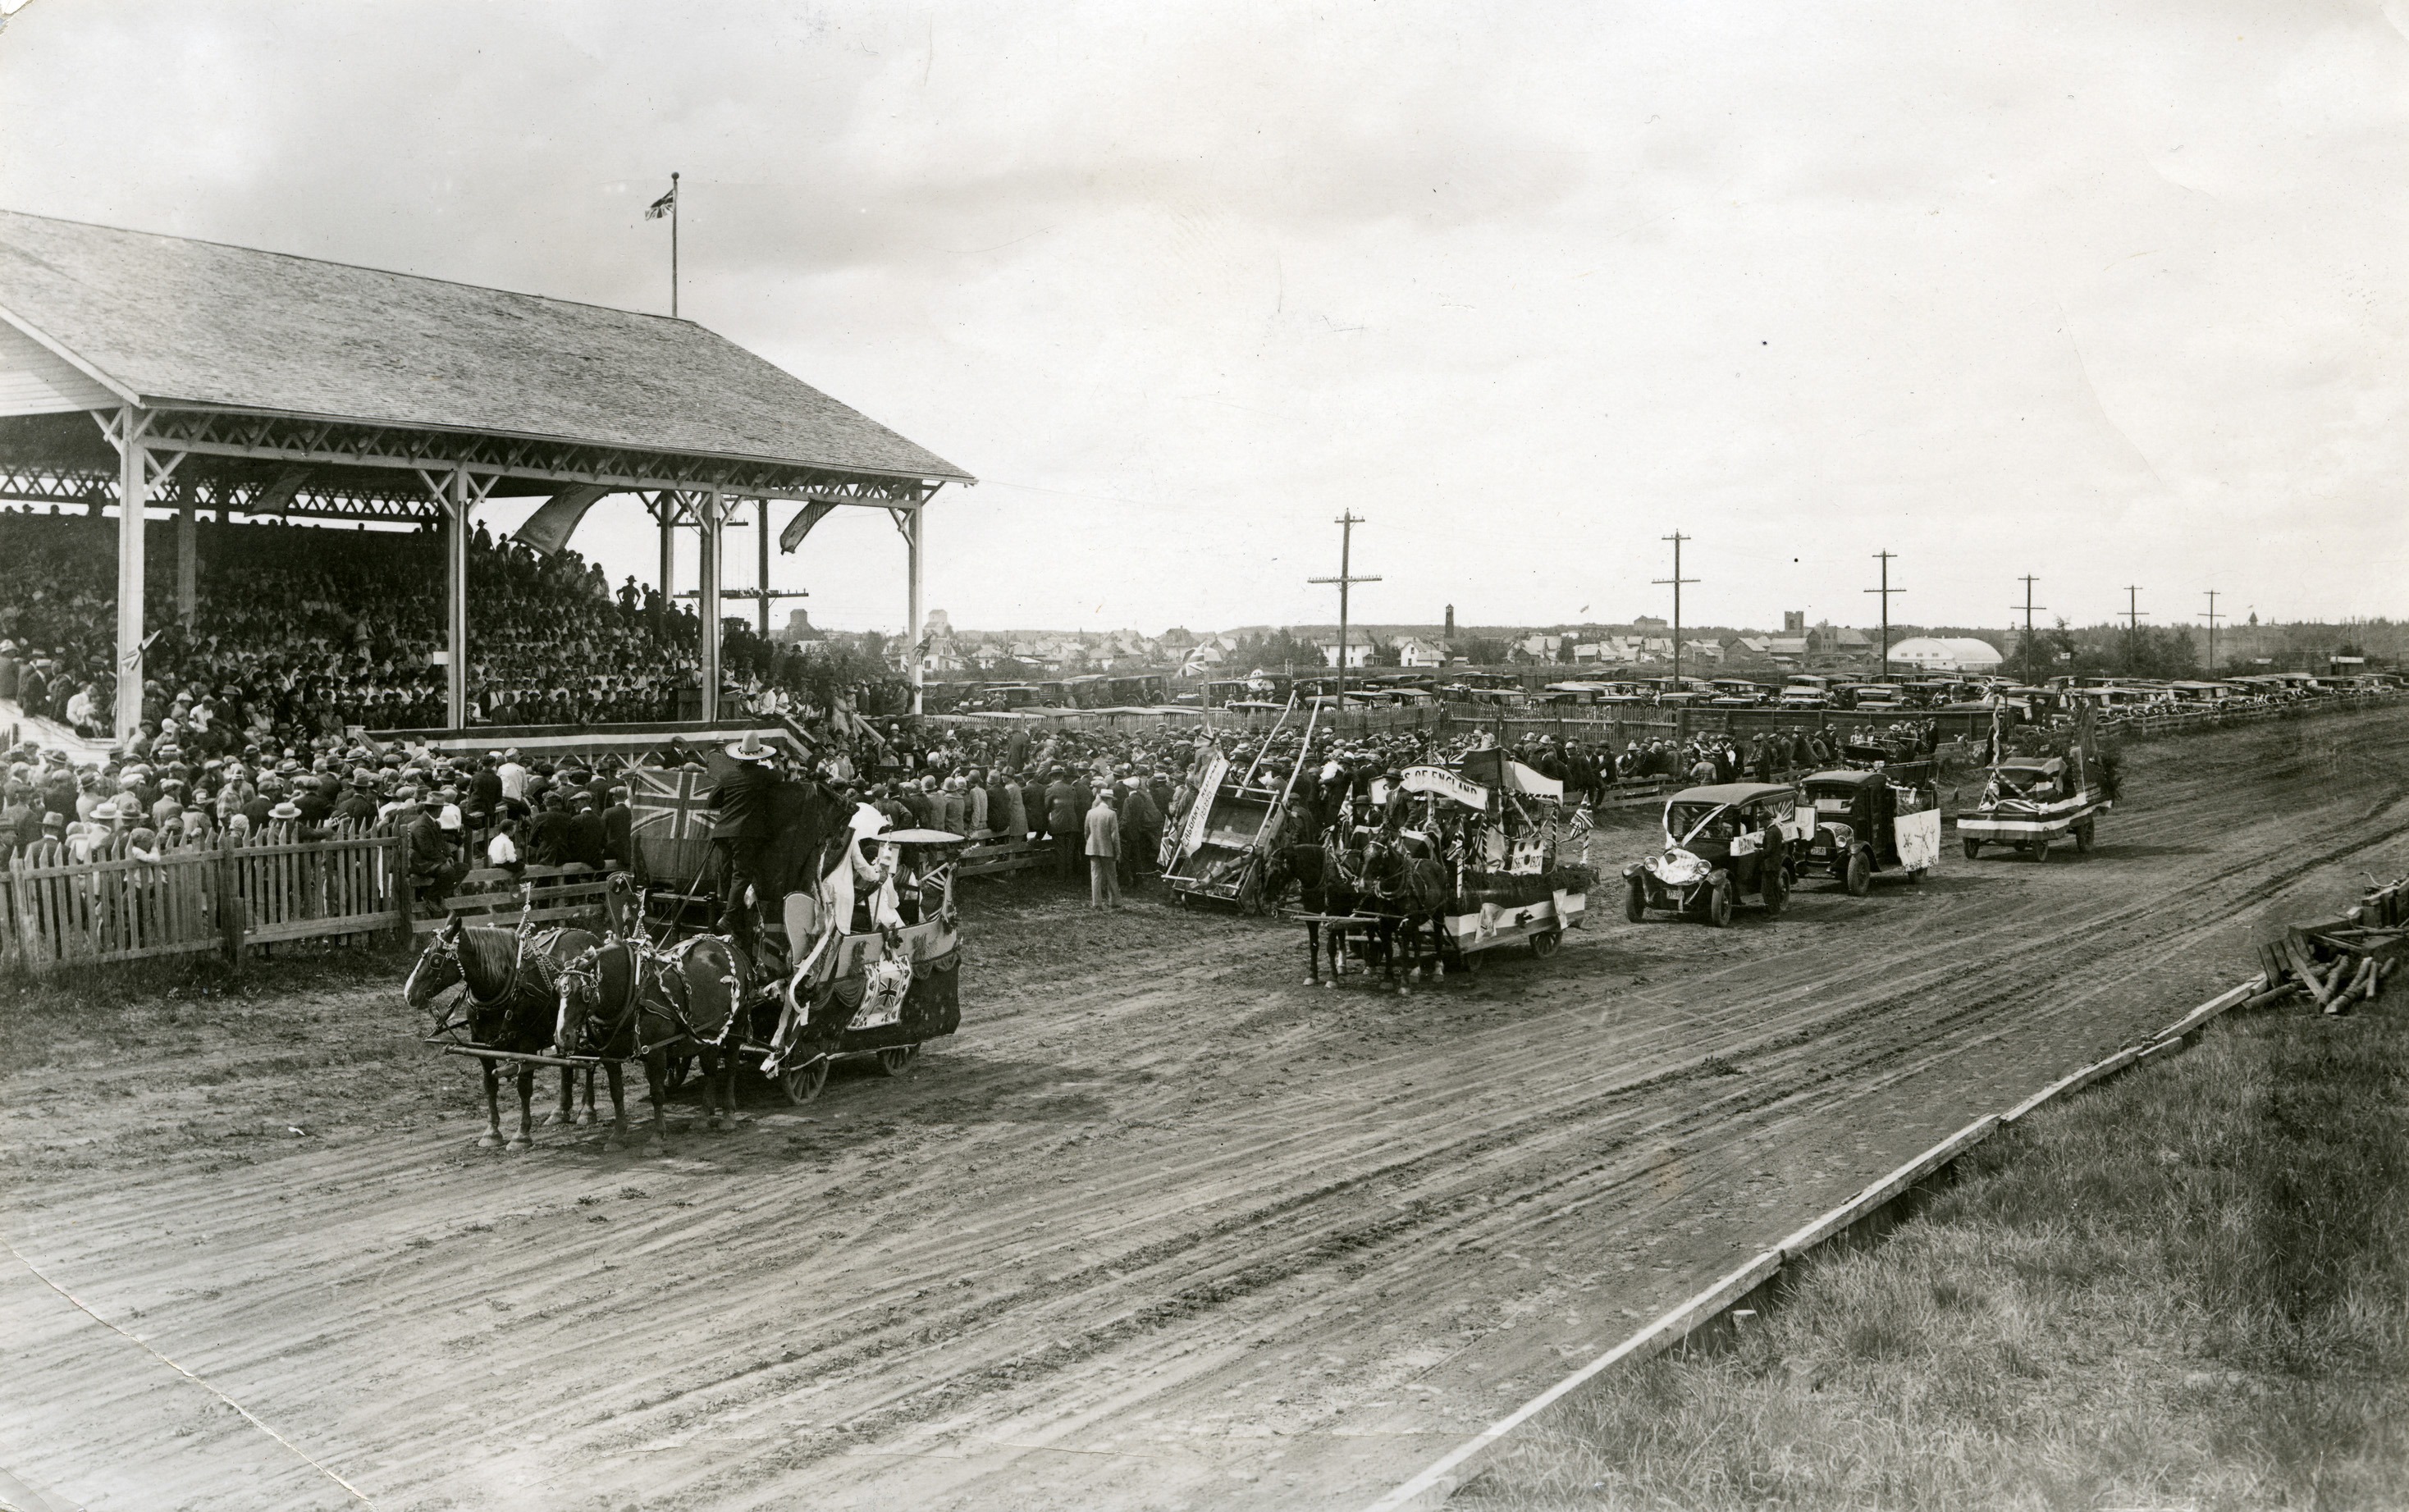 CELEBRATION - The conclusion of Red Deer’s Diamond Jubilee parade in front of the grandstand at the Fairgrounds